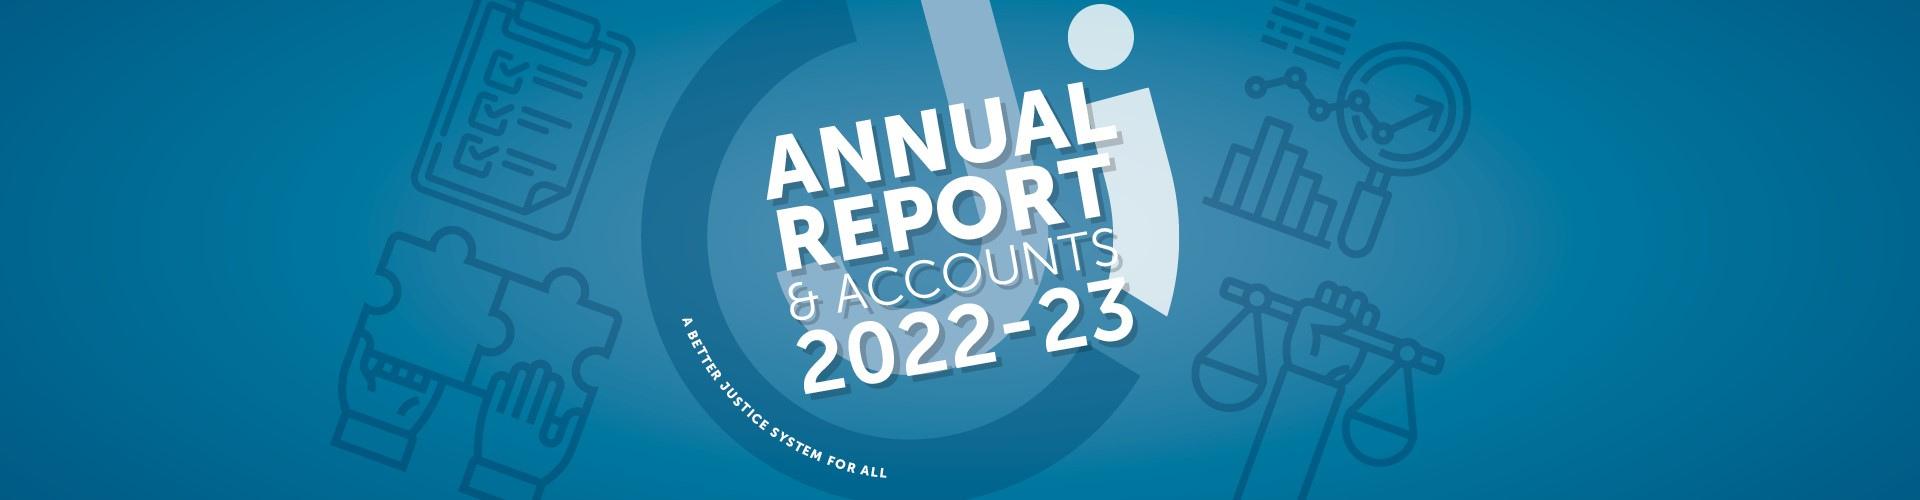 Graphic of CJI Annual Report and Accounts for 2022-2023